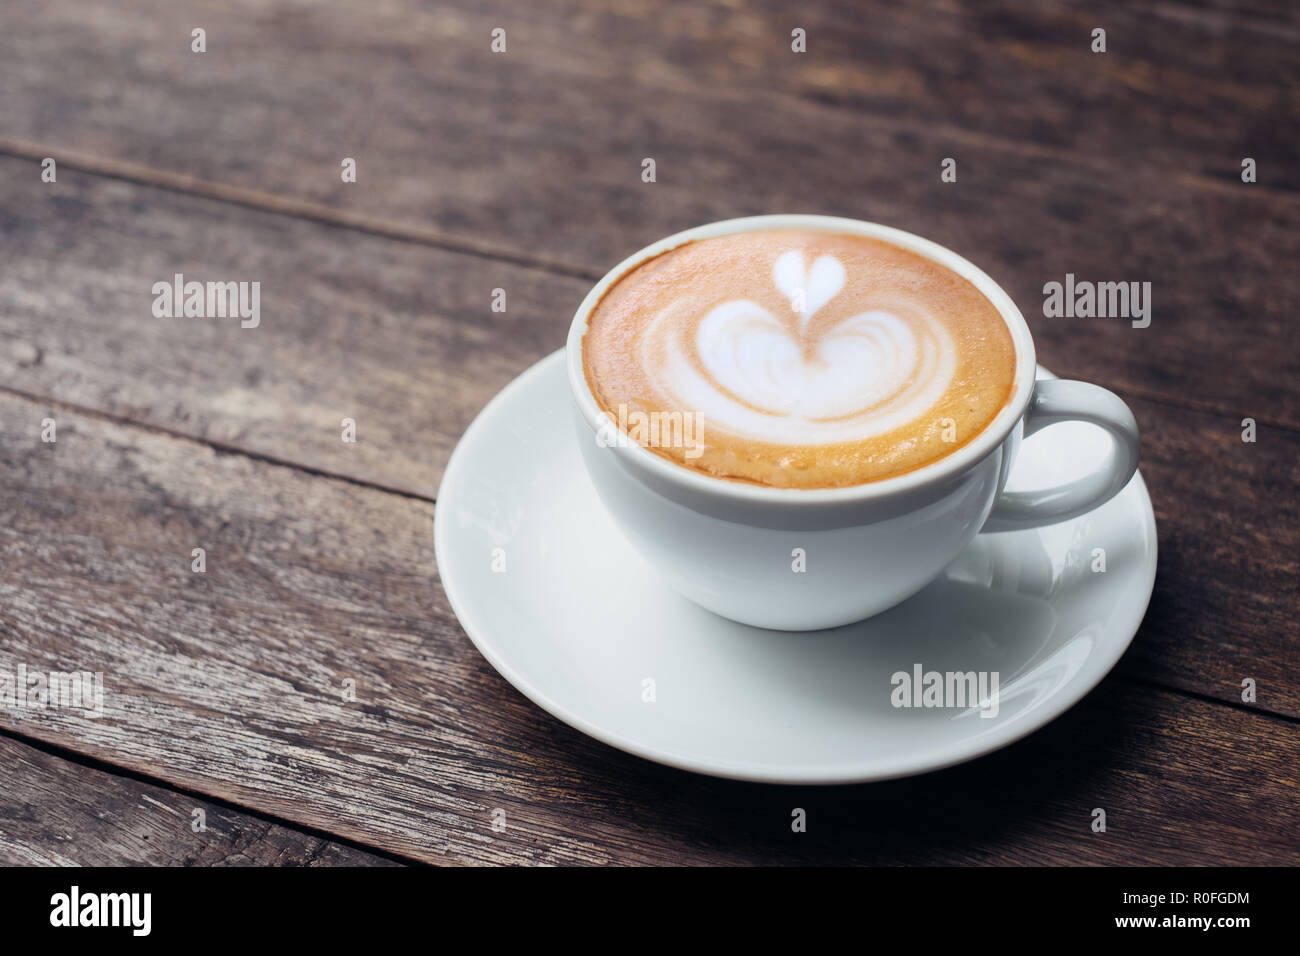 https://c8.alamy.com/comp/R0FGDM/close-up-white-coffee-cup-with-heart-shape-latte-art-on-grunge-wood-table-at-cafe-R0FGDM.jpg